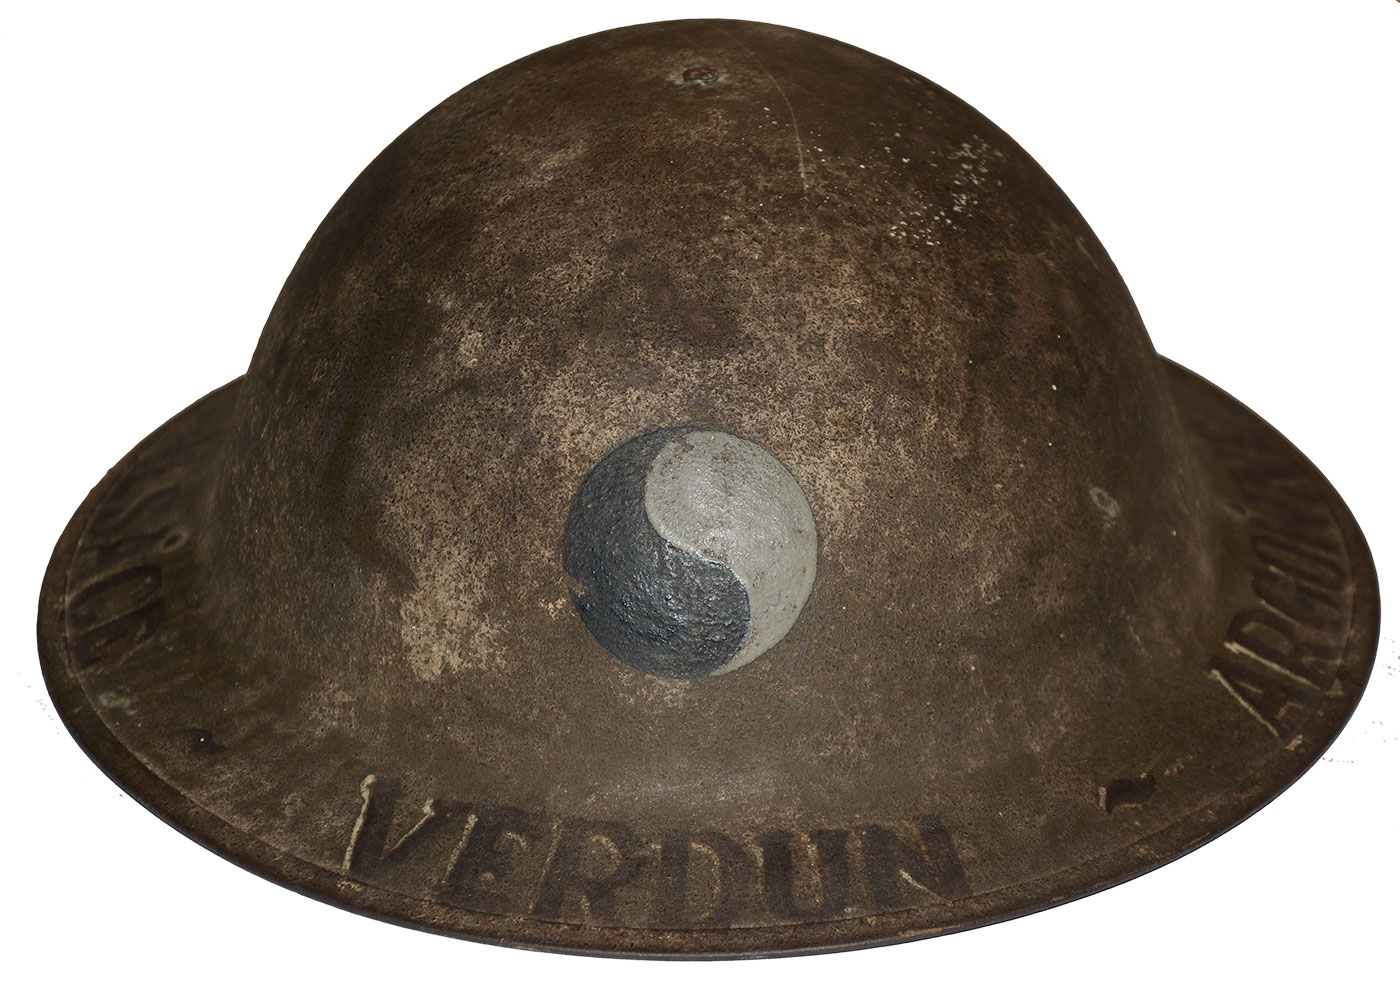 BEAUTIFULLY PAINTED & IDENTIFIED US WORLD WAR ONE MODEL 1917 HELMET WITH 29th DIVISION INSIGNIA AND BATTLE HONORS